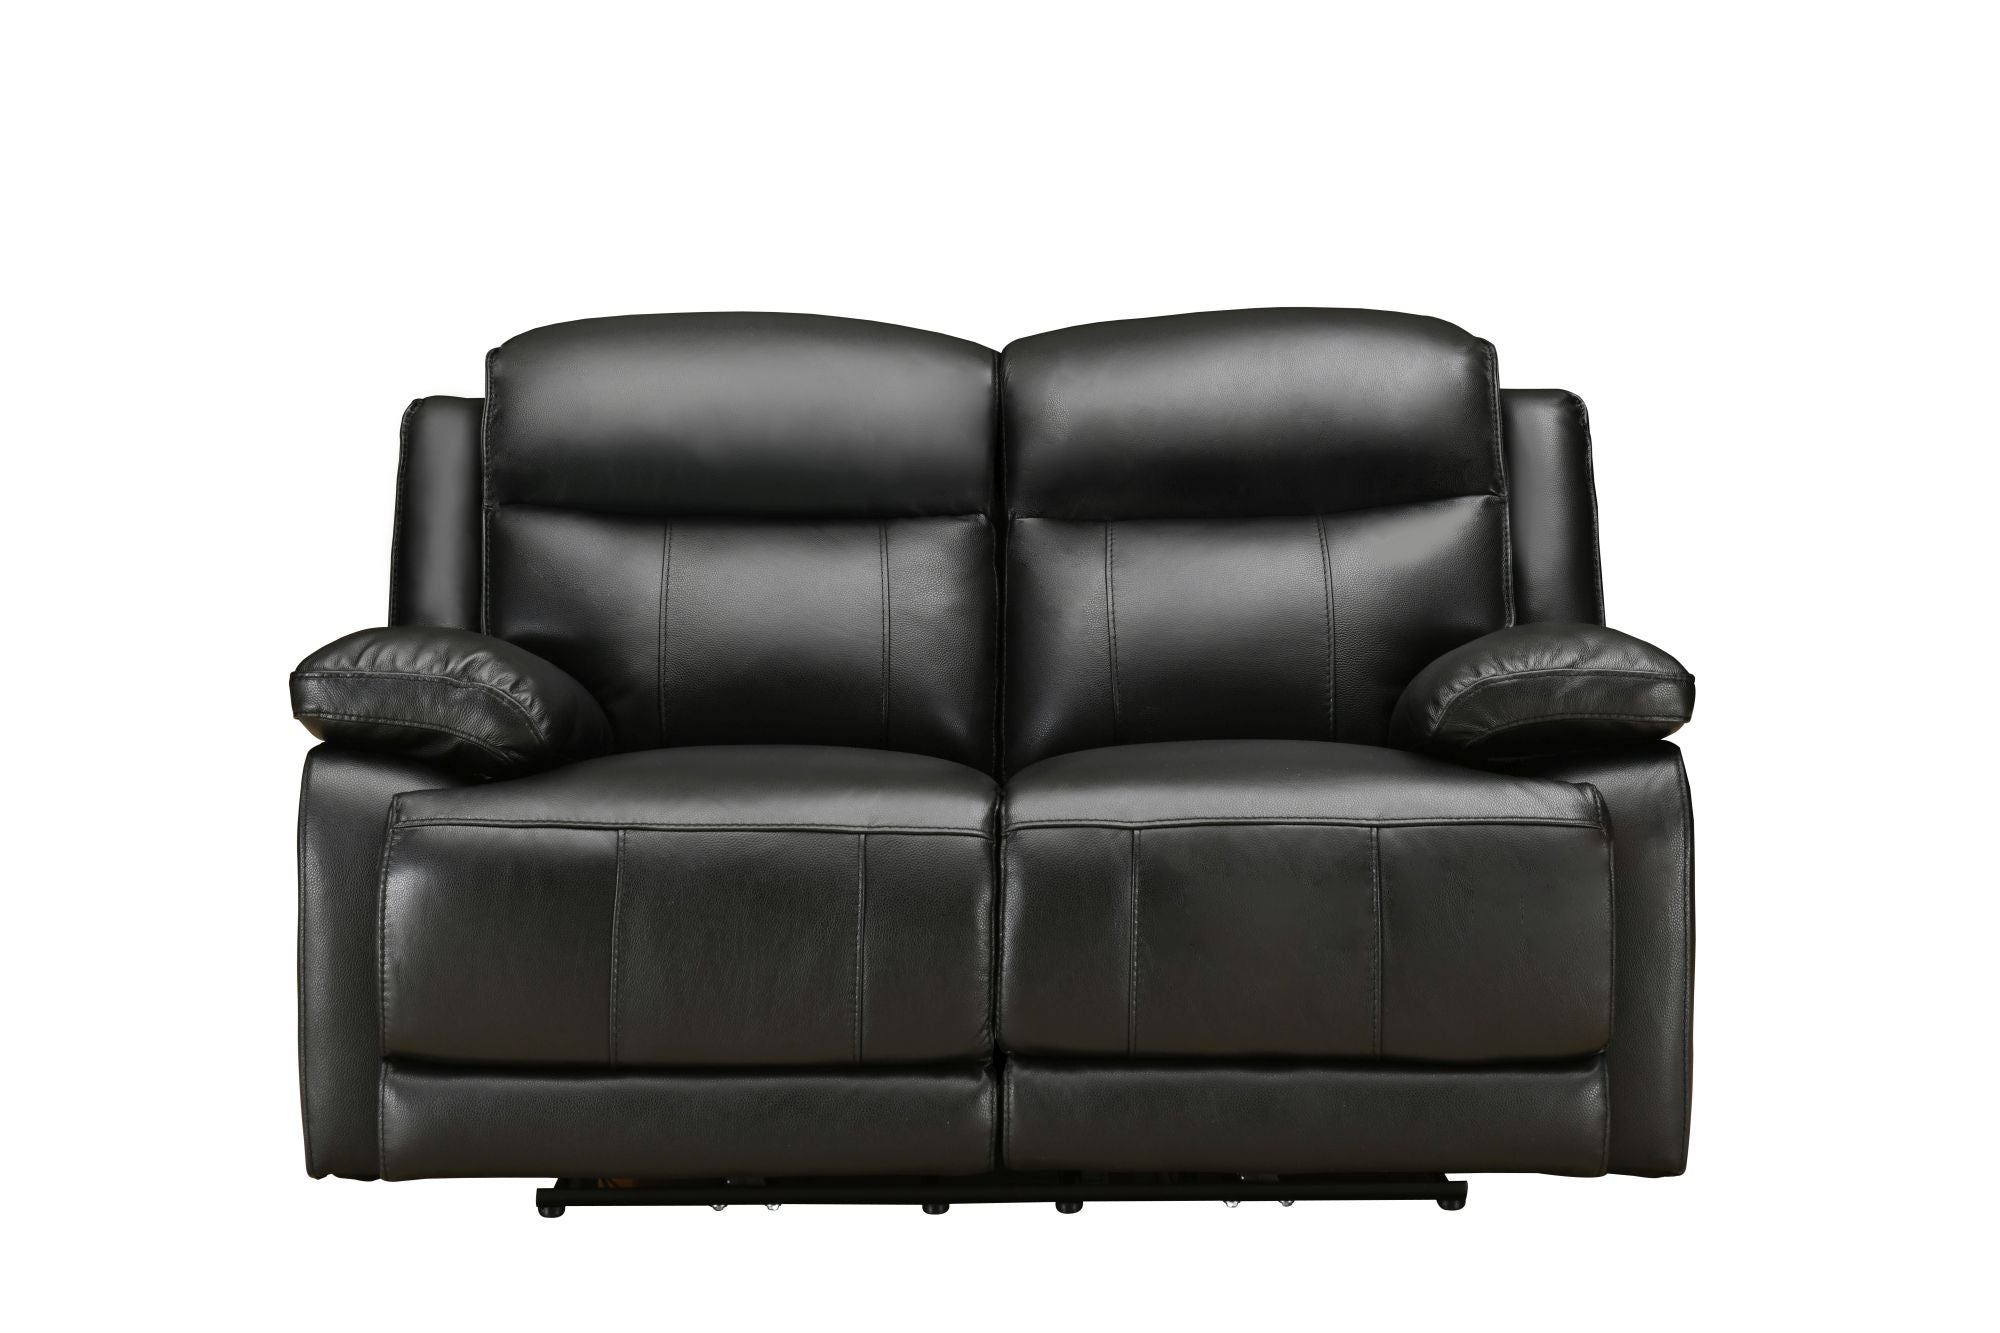 Montana 2 Seater Leather Recliner Sofa  in Black